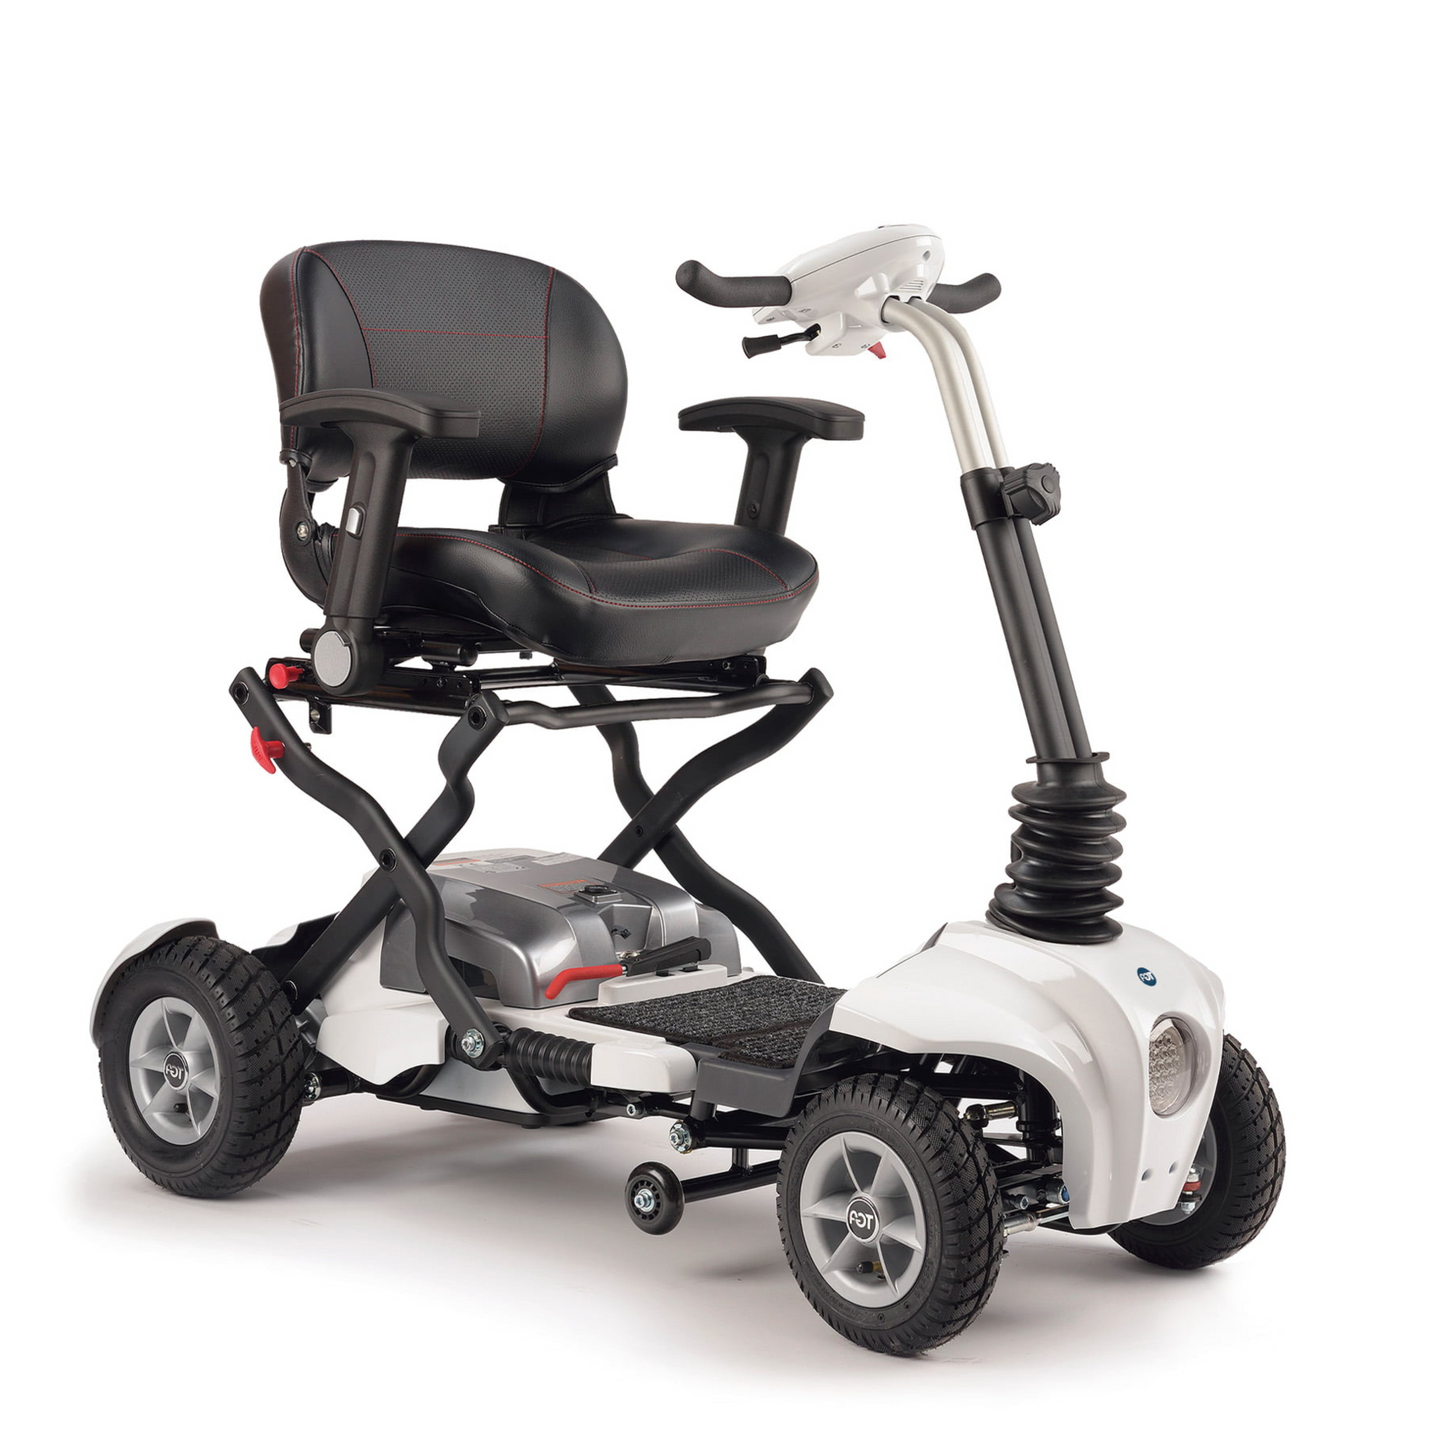 Maximo Folding Mobility Scooter